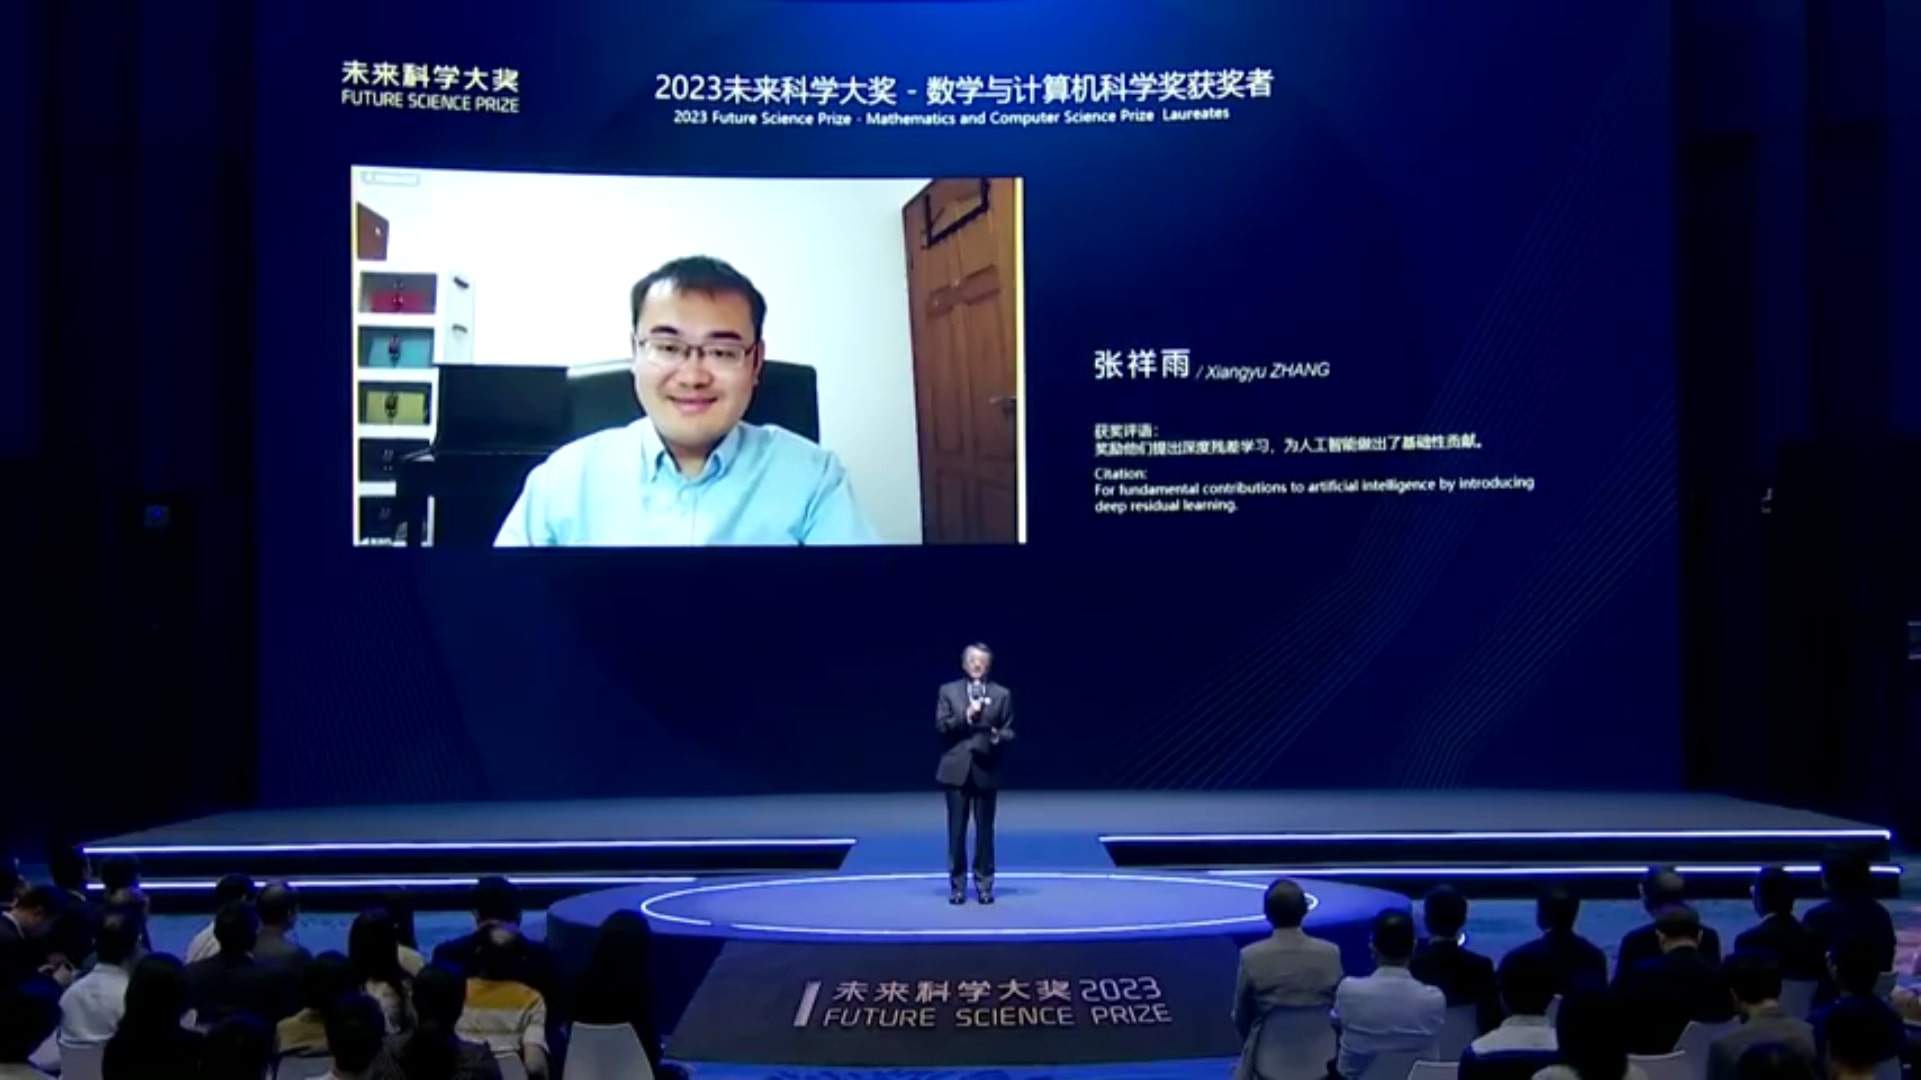 Artificial intelligence researcher Dr Zhang Xiangyu is the youngest laureate in the history of the Future Science Prize. Photo: Handout